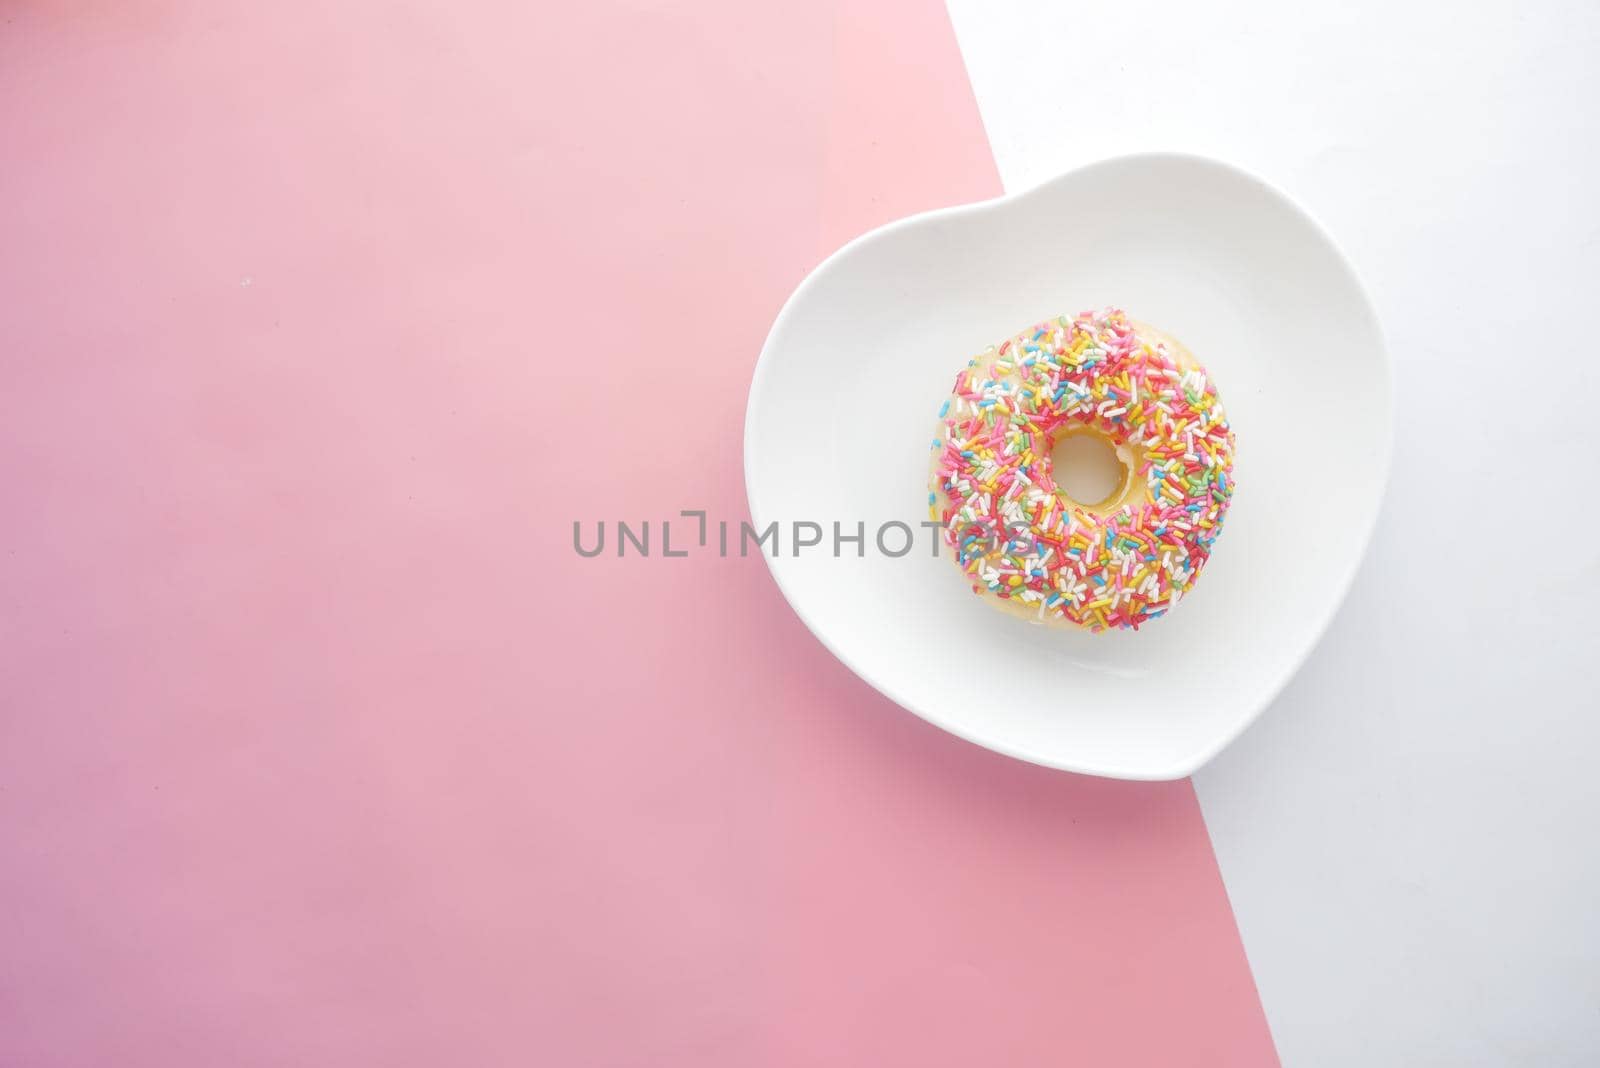 chocolate donuts on plate with copy space by towfiq007